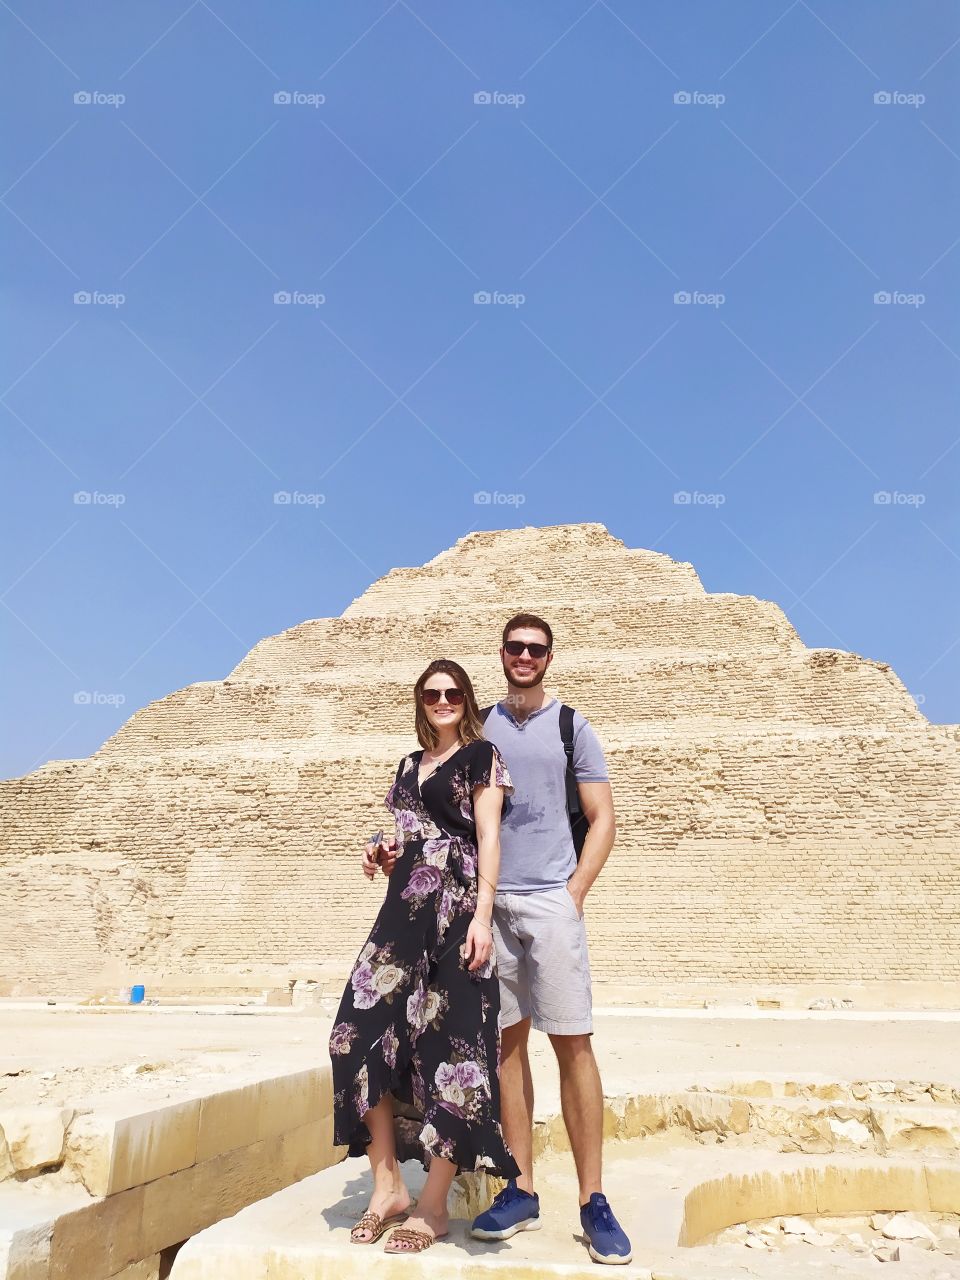 this photo with step pyramid saqqara the first pyramid in egypt and first building to be stone in world.